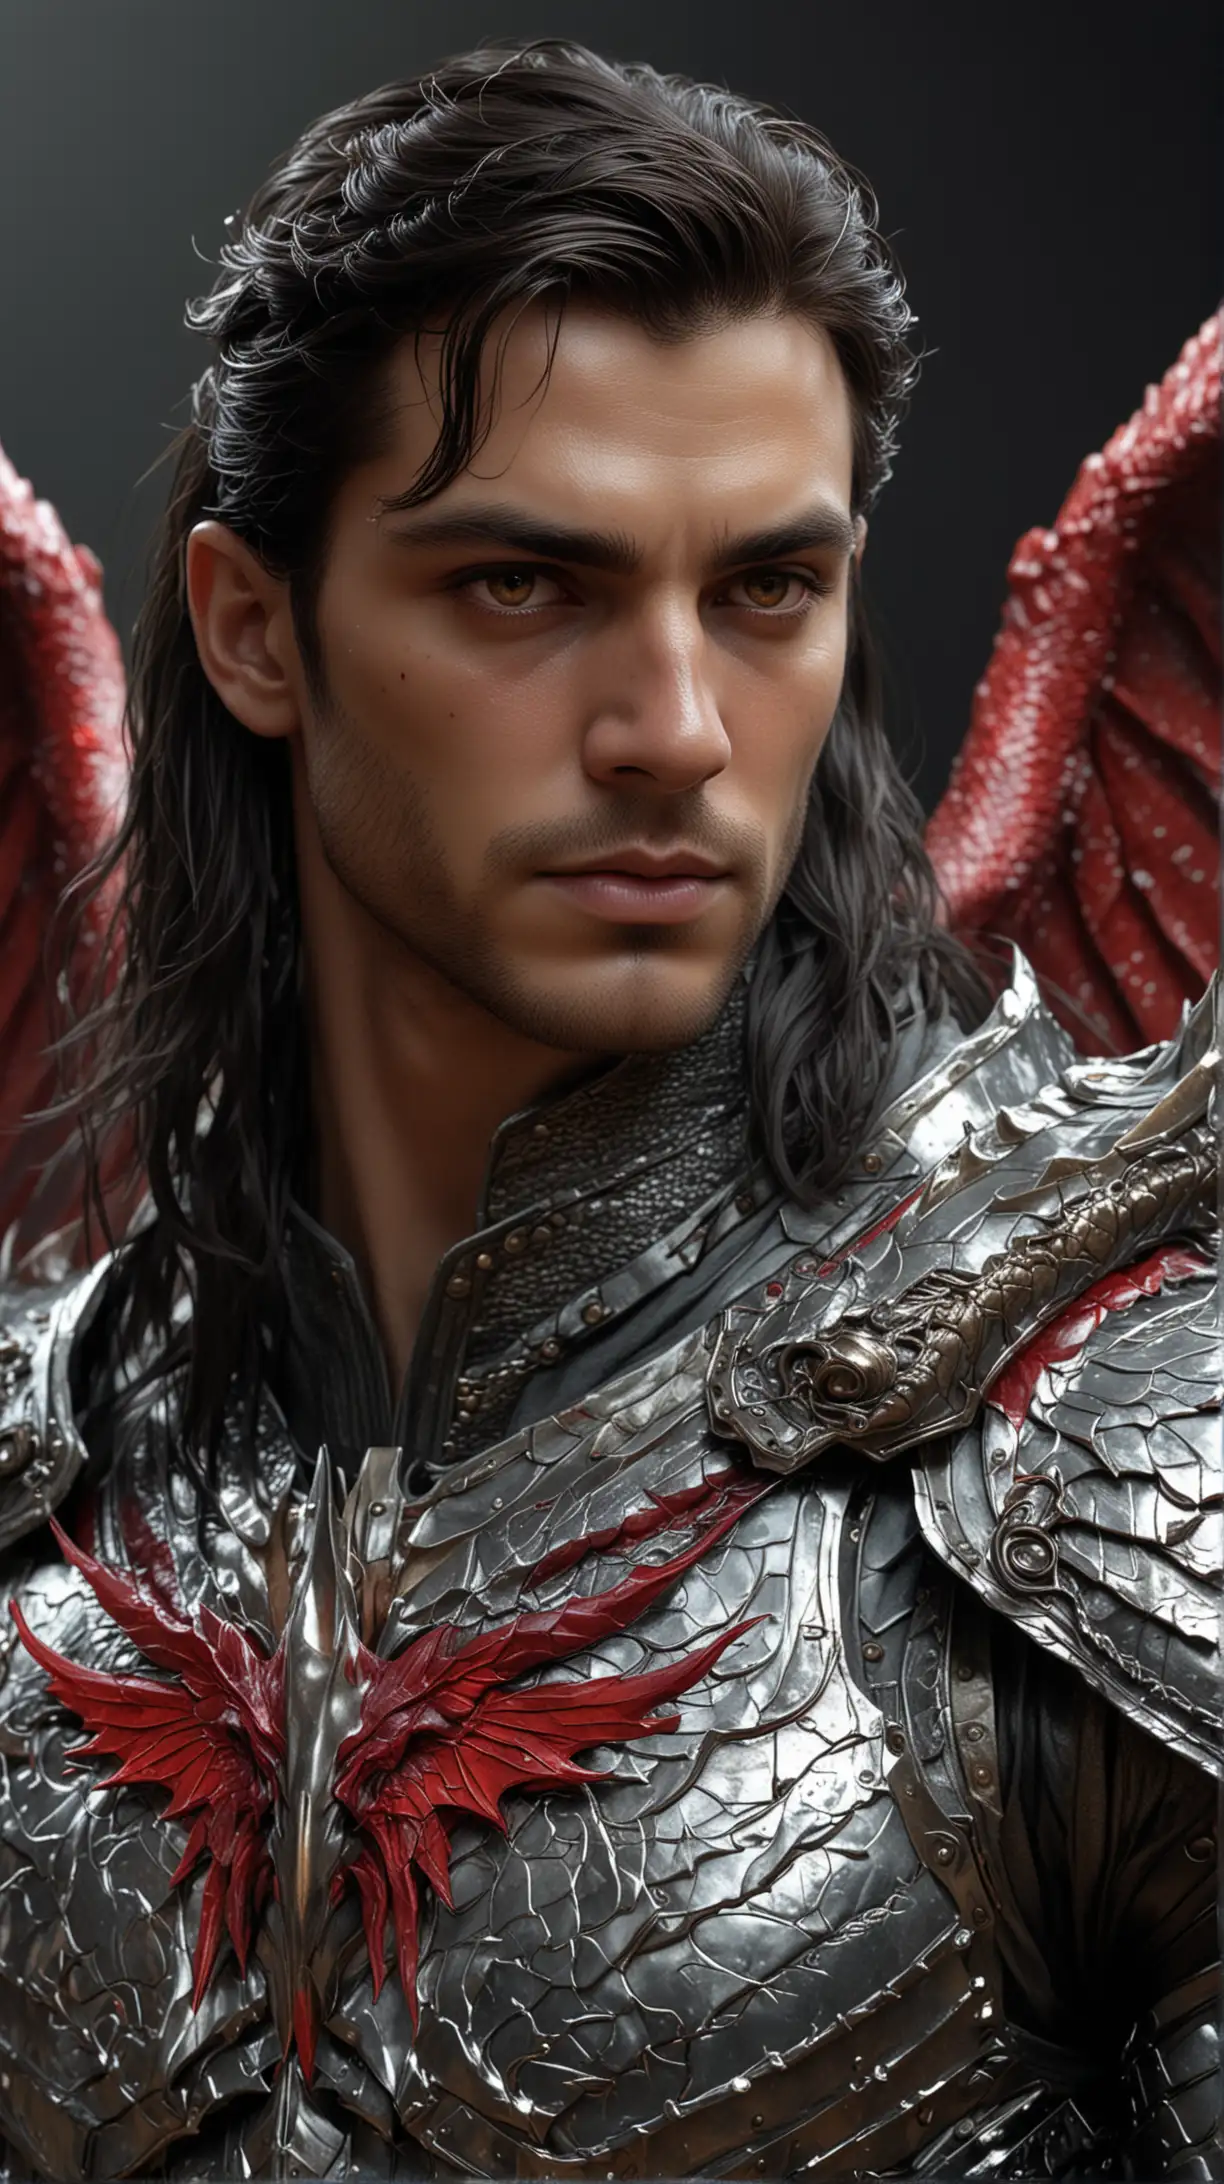 Majestic Dragon Knight in Translucent Armor Hyperrealistic 8K Portrait Inspired by Sargent